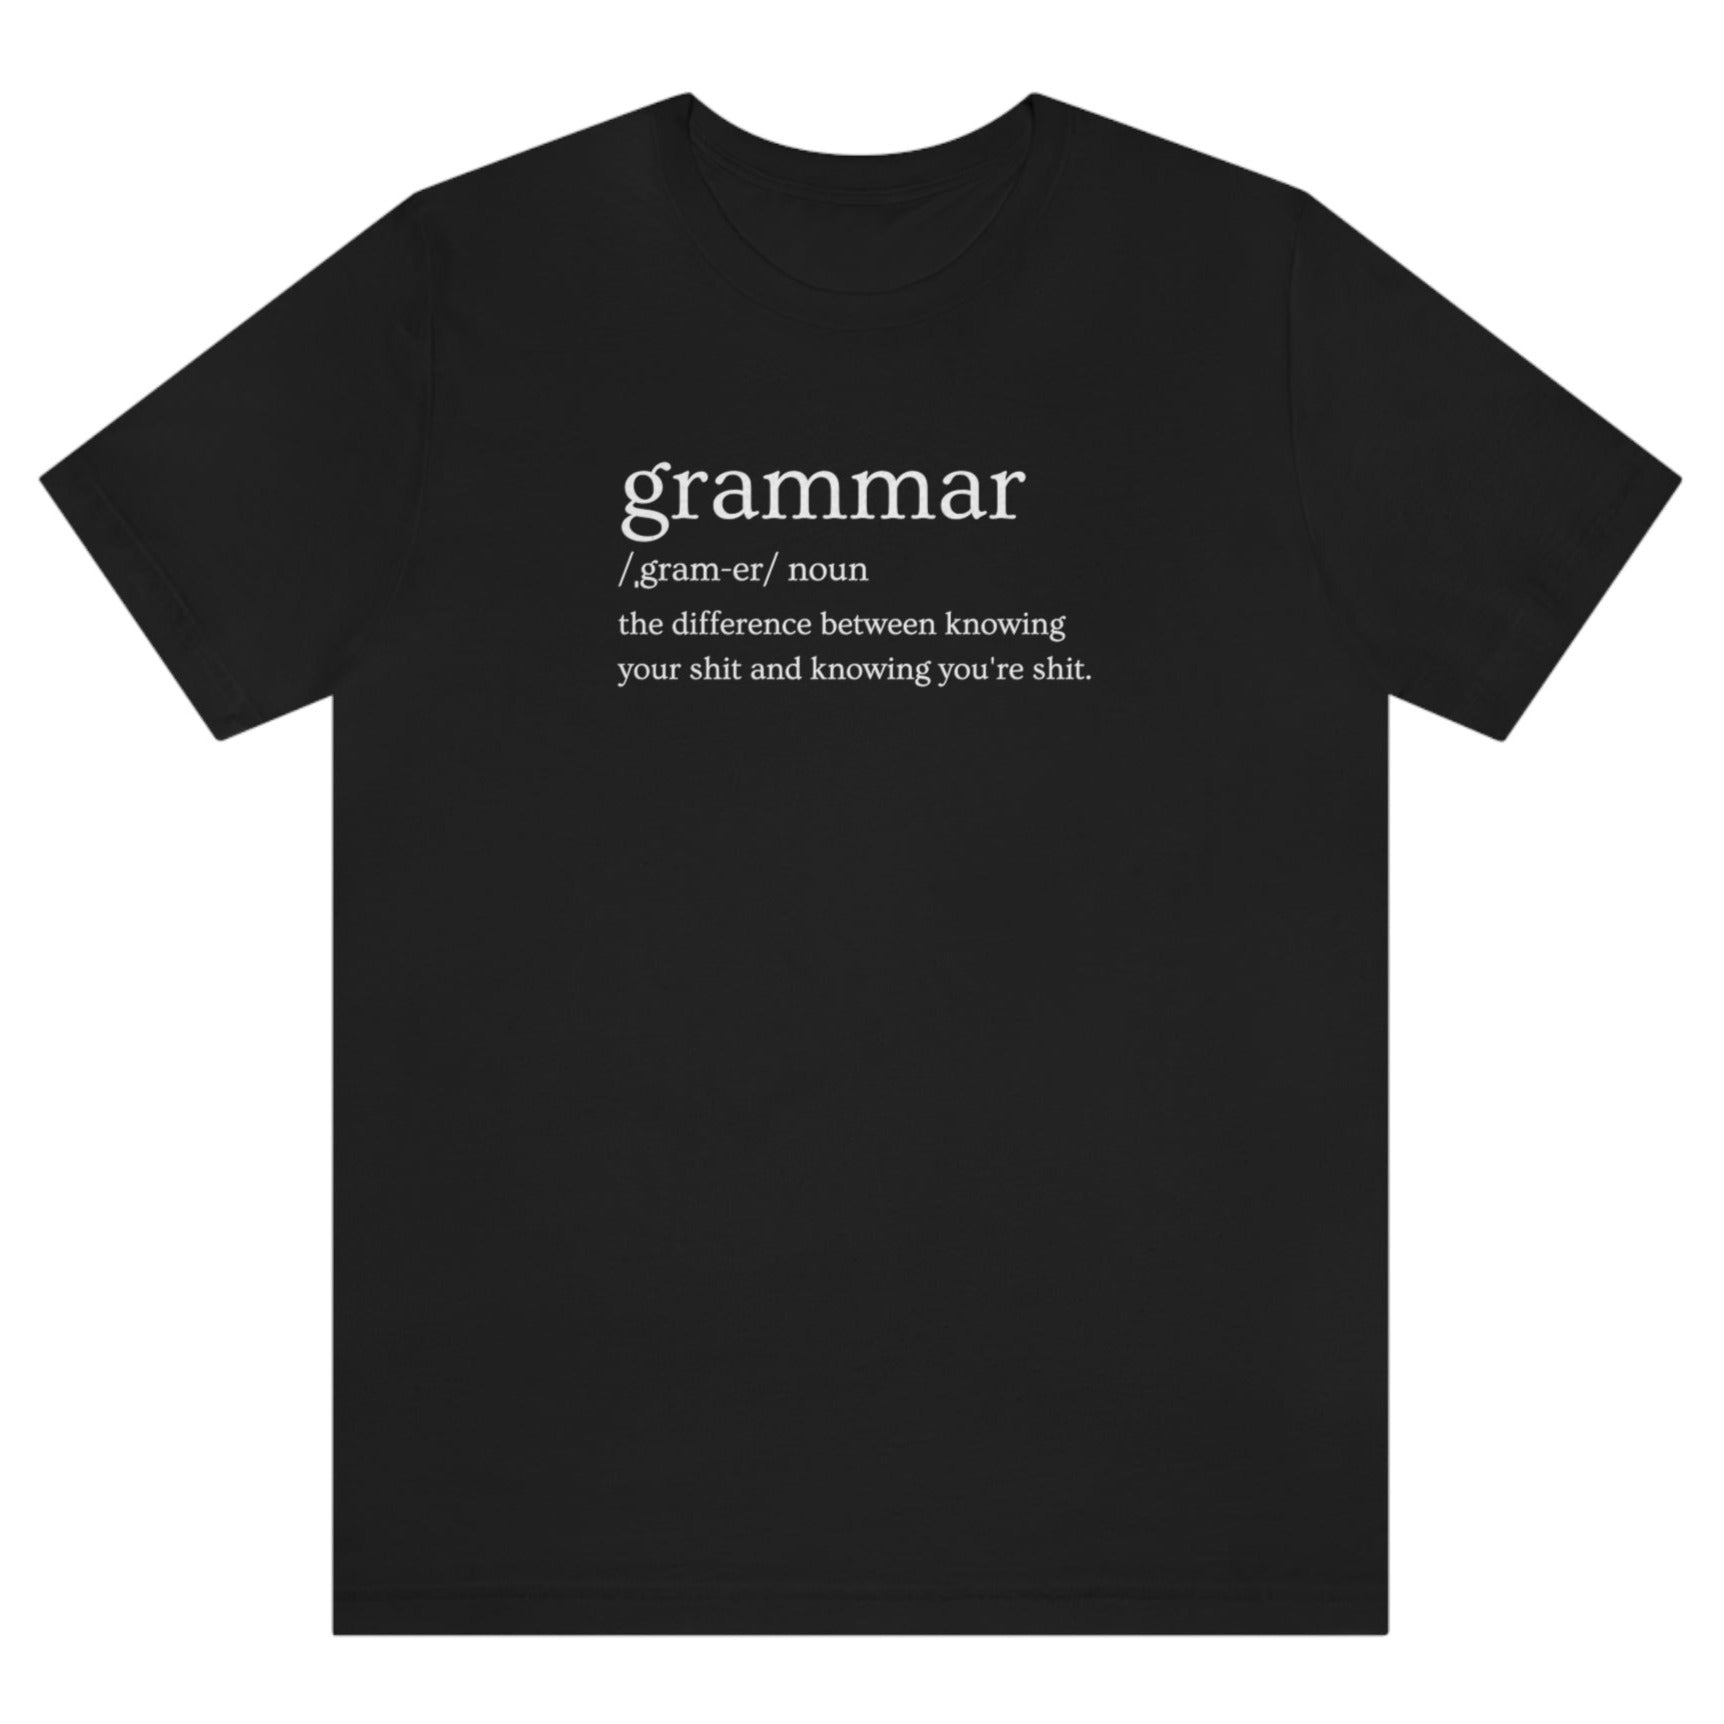 grammar-the-difference-between-knowing-your-shit-and-knowing-youre-shit-black-t-shirt